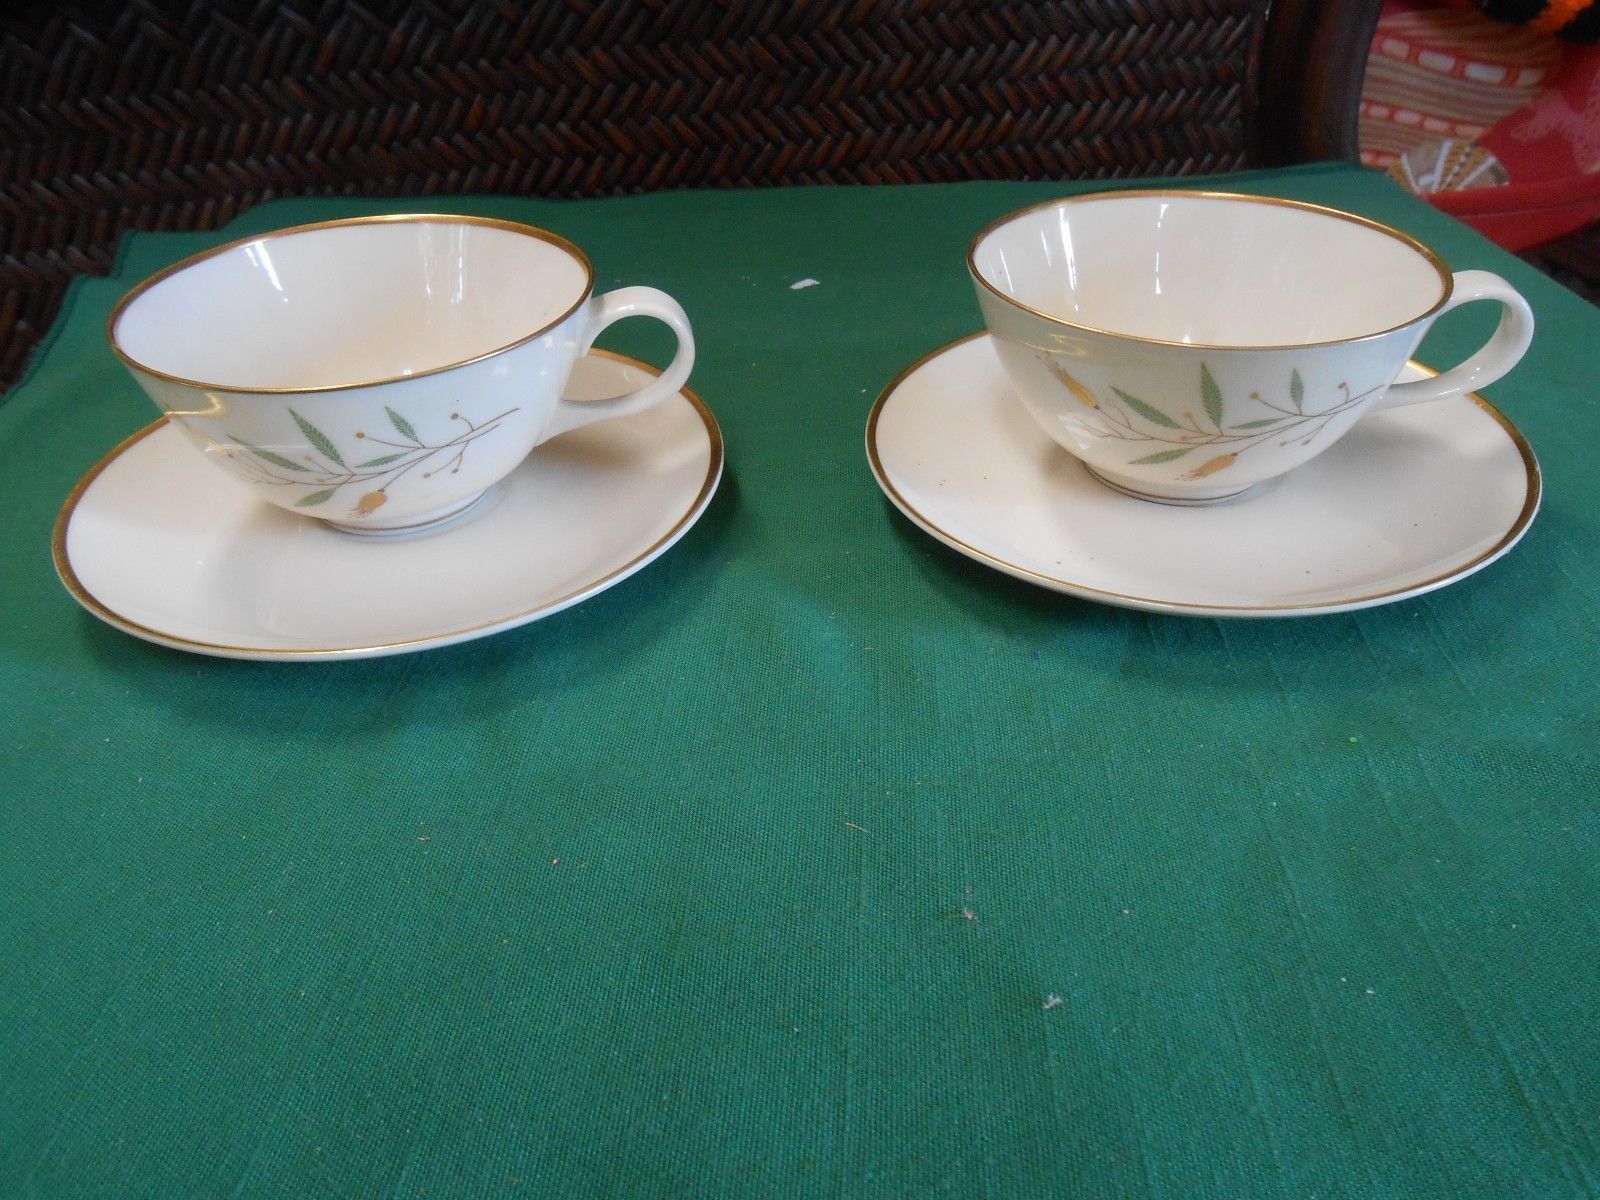 Great Vintage SYRACUSE China Set of 2 CUPS & SAUCERS - $5.26